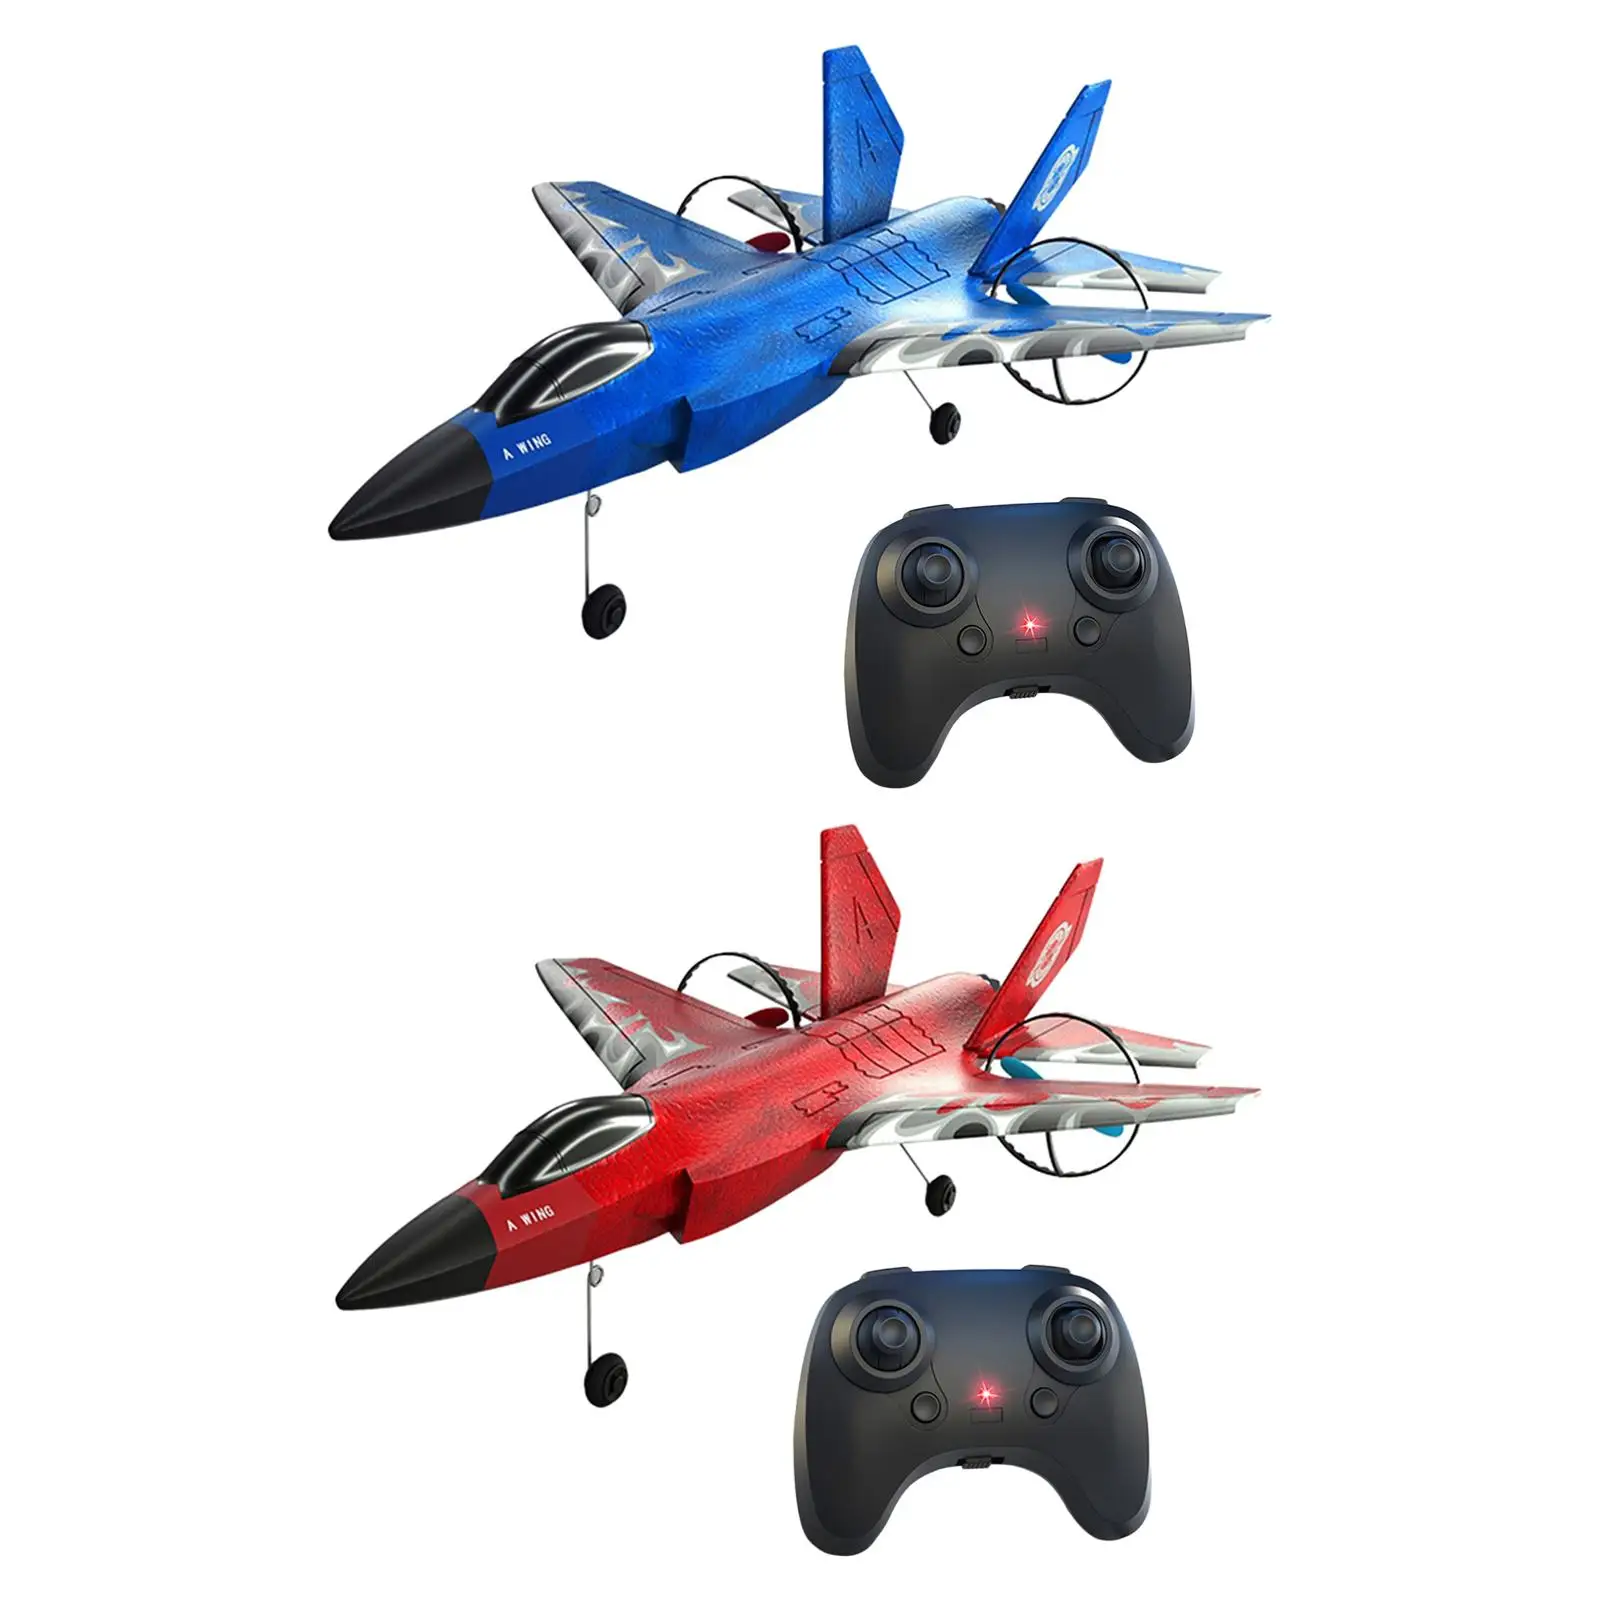 Remote Control Jet Airplane Lightweight Easy to Control Foam RC Airplane RC Glider RC Plane for Kids Beginner Adults Boys Girls